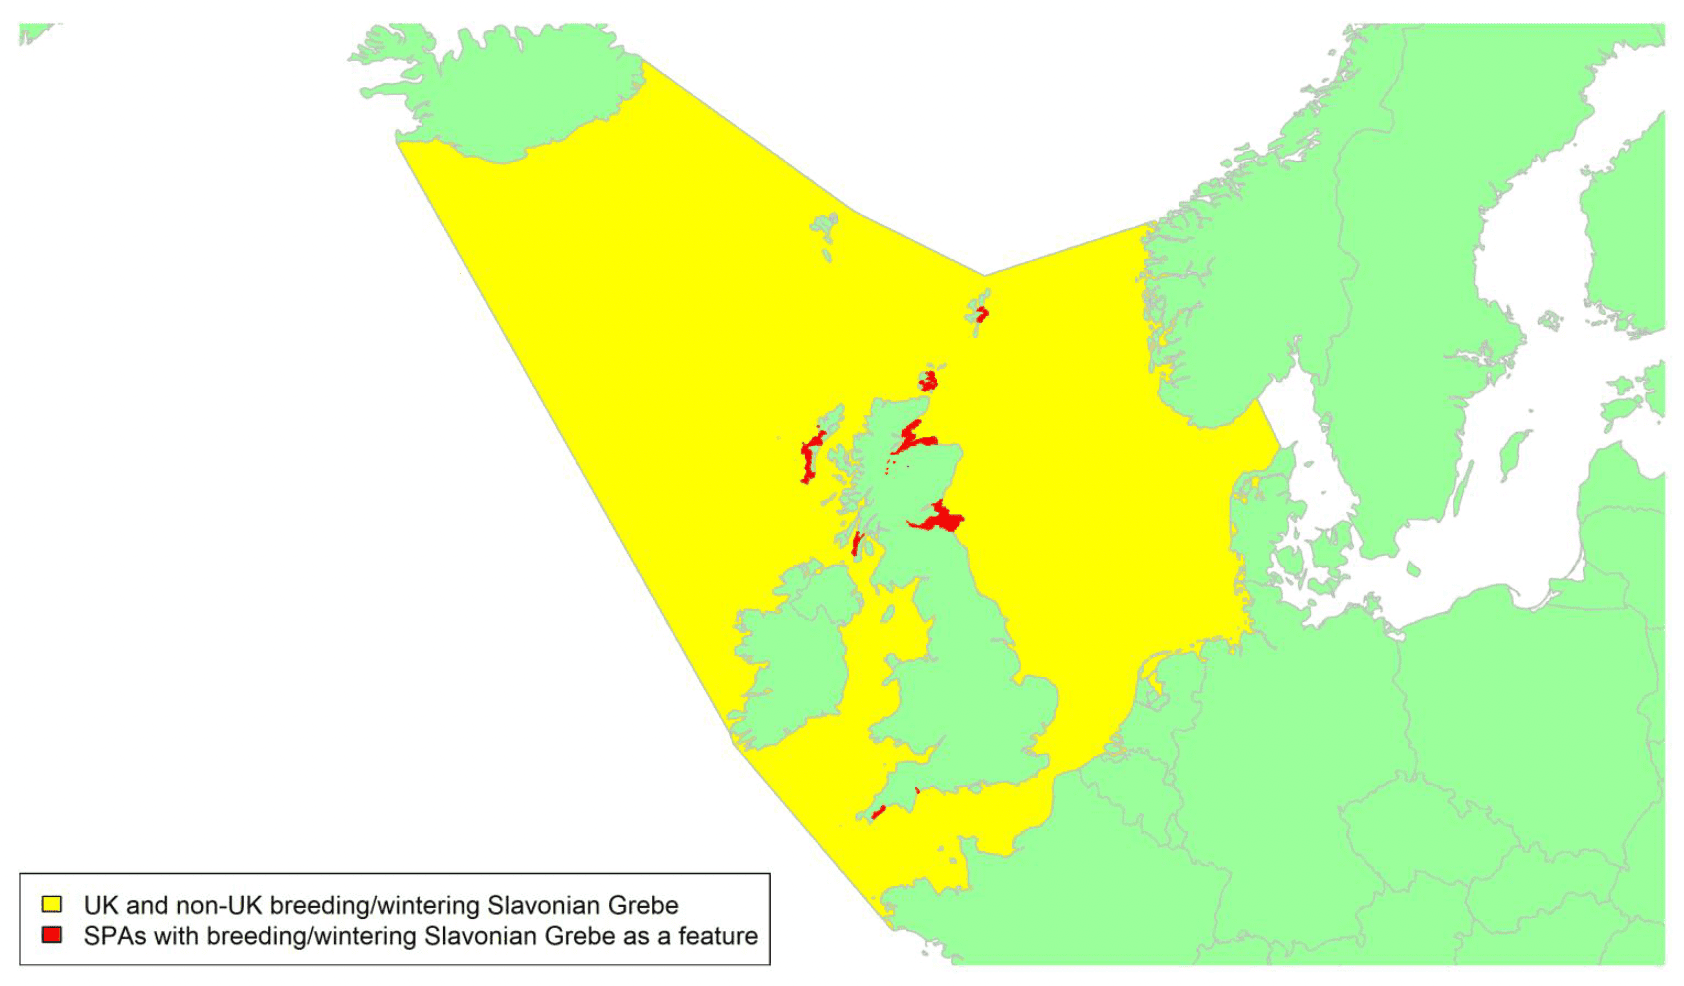 Map of North West Europe showing migratory routes and SPAs within the UK for Slavonian Grebe as described in the text below.